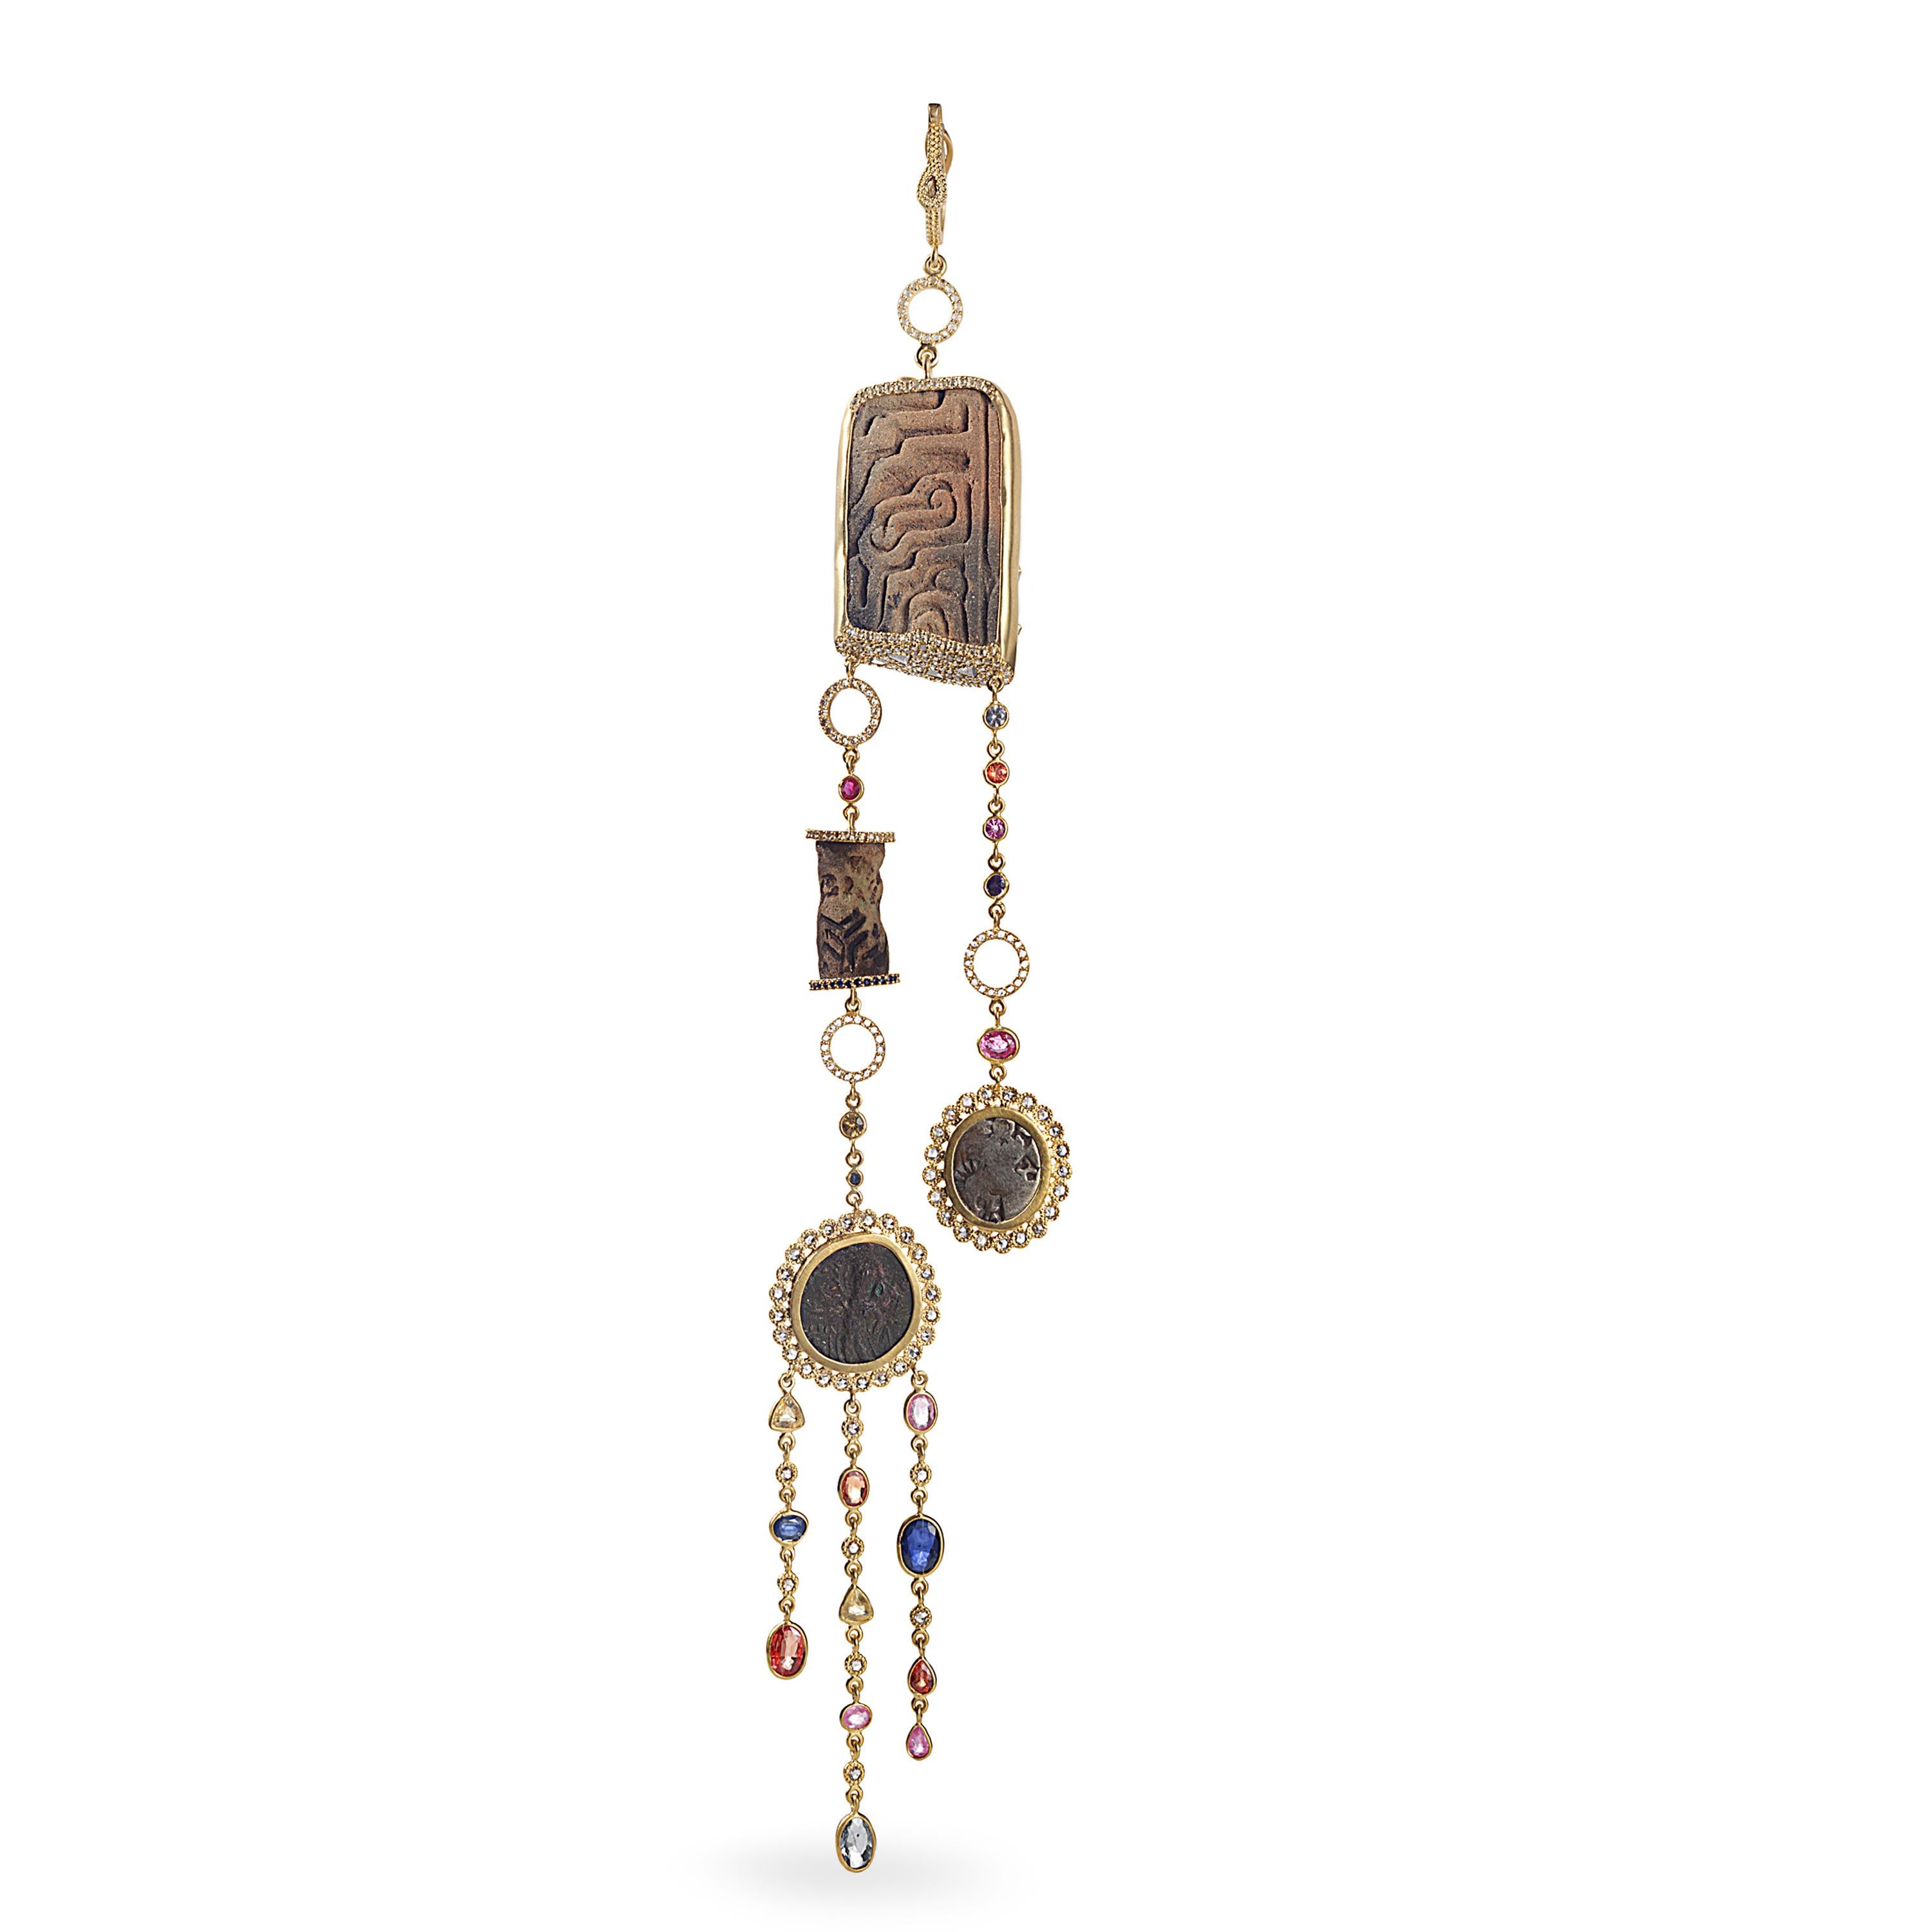 Ancient 20 karat Yellow Gold Pendant with Ecuadorian Flat Stamp, Neo-Assyrian Faience Cylinder Seal, and 6.46-carat Multi-color Sapphires. This Pendant Comes With A Small Kushan Coin and Indo Shai Coin As Well On the Pendant All Set with 3.26-carat